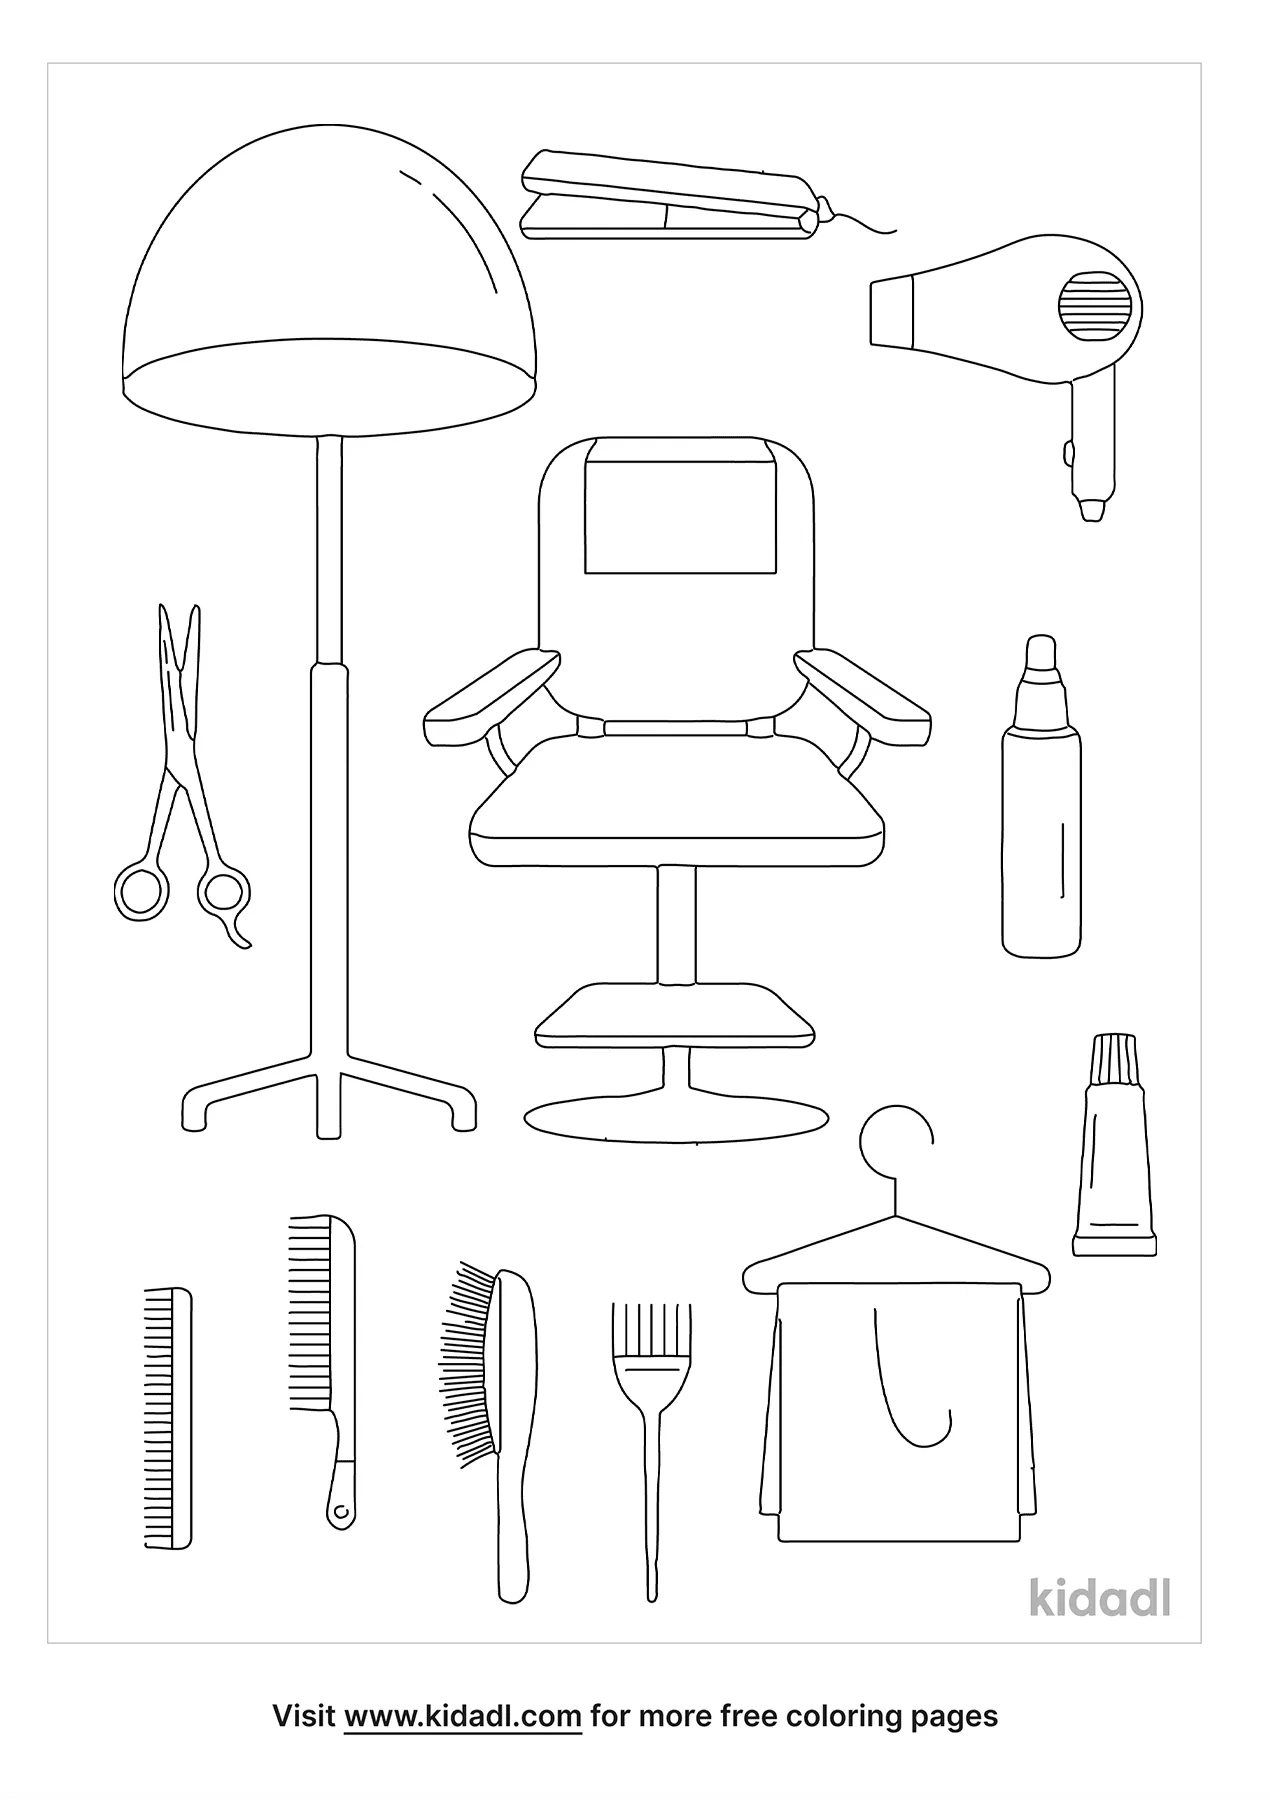 Free Hair Salon Supplies Coloring Page | Coloring Page Printables | Kidadl